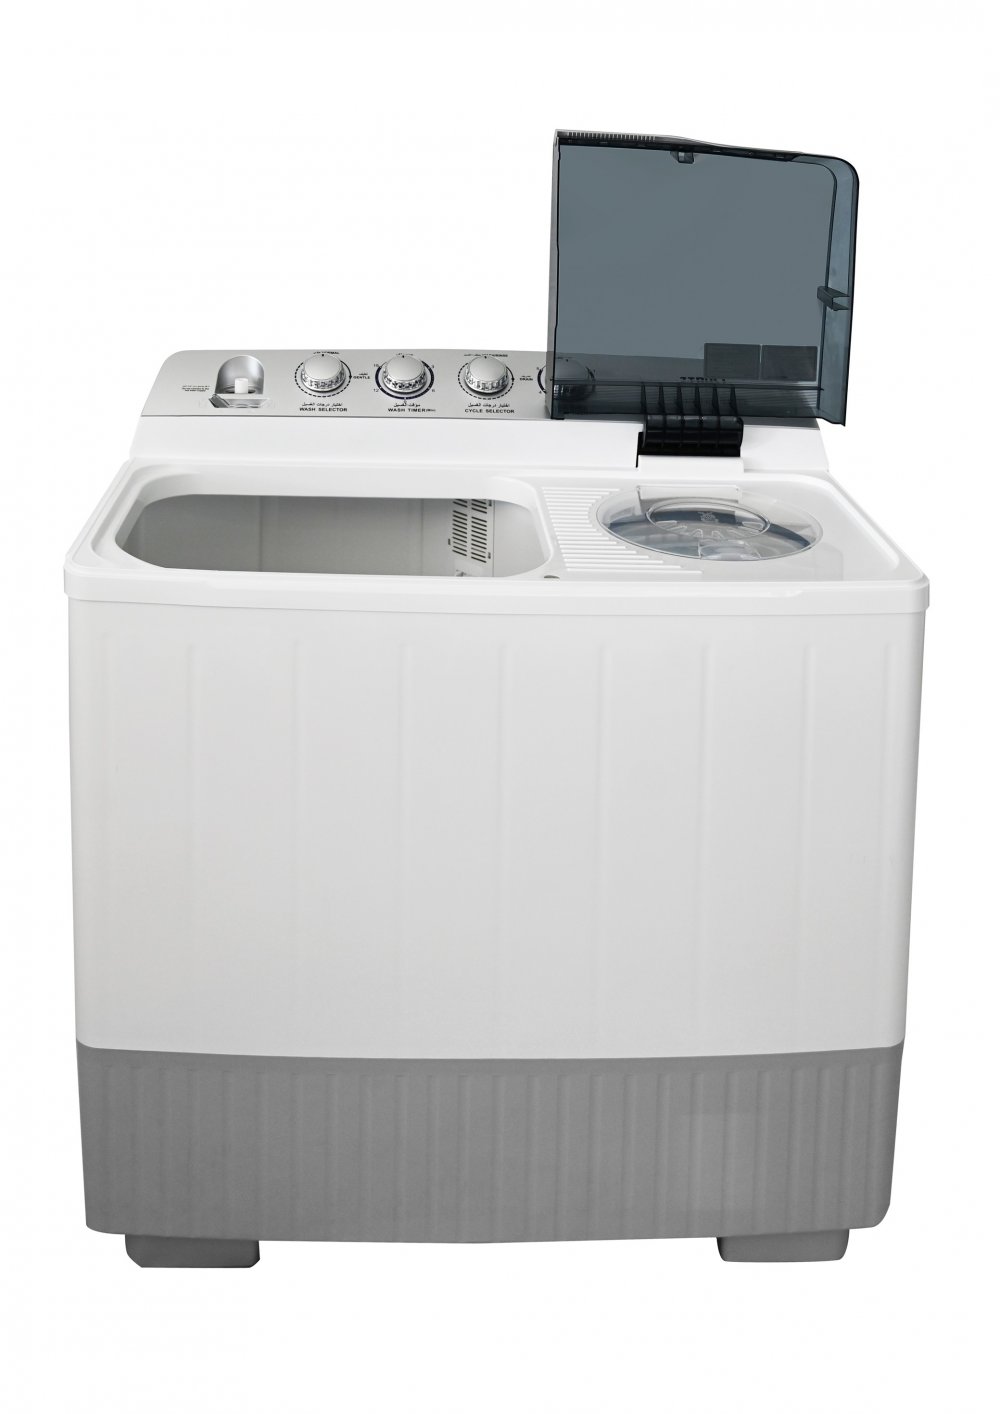 Twin/Top washer, 14K/W,7K/D